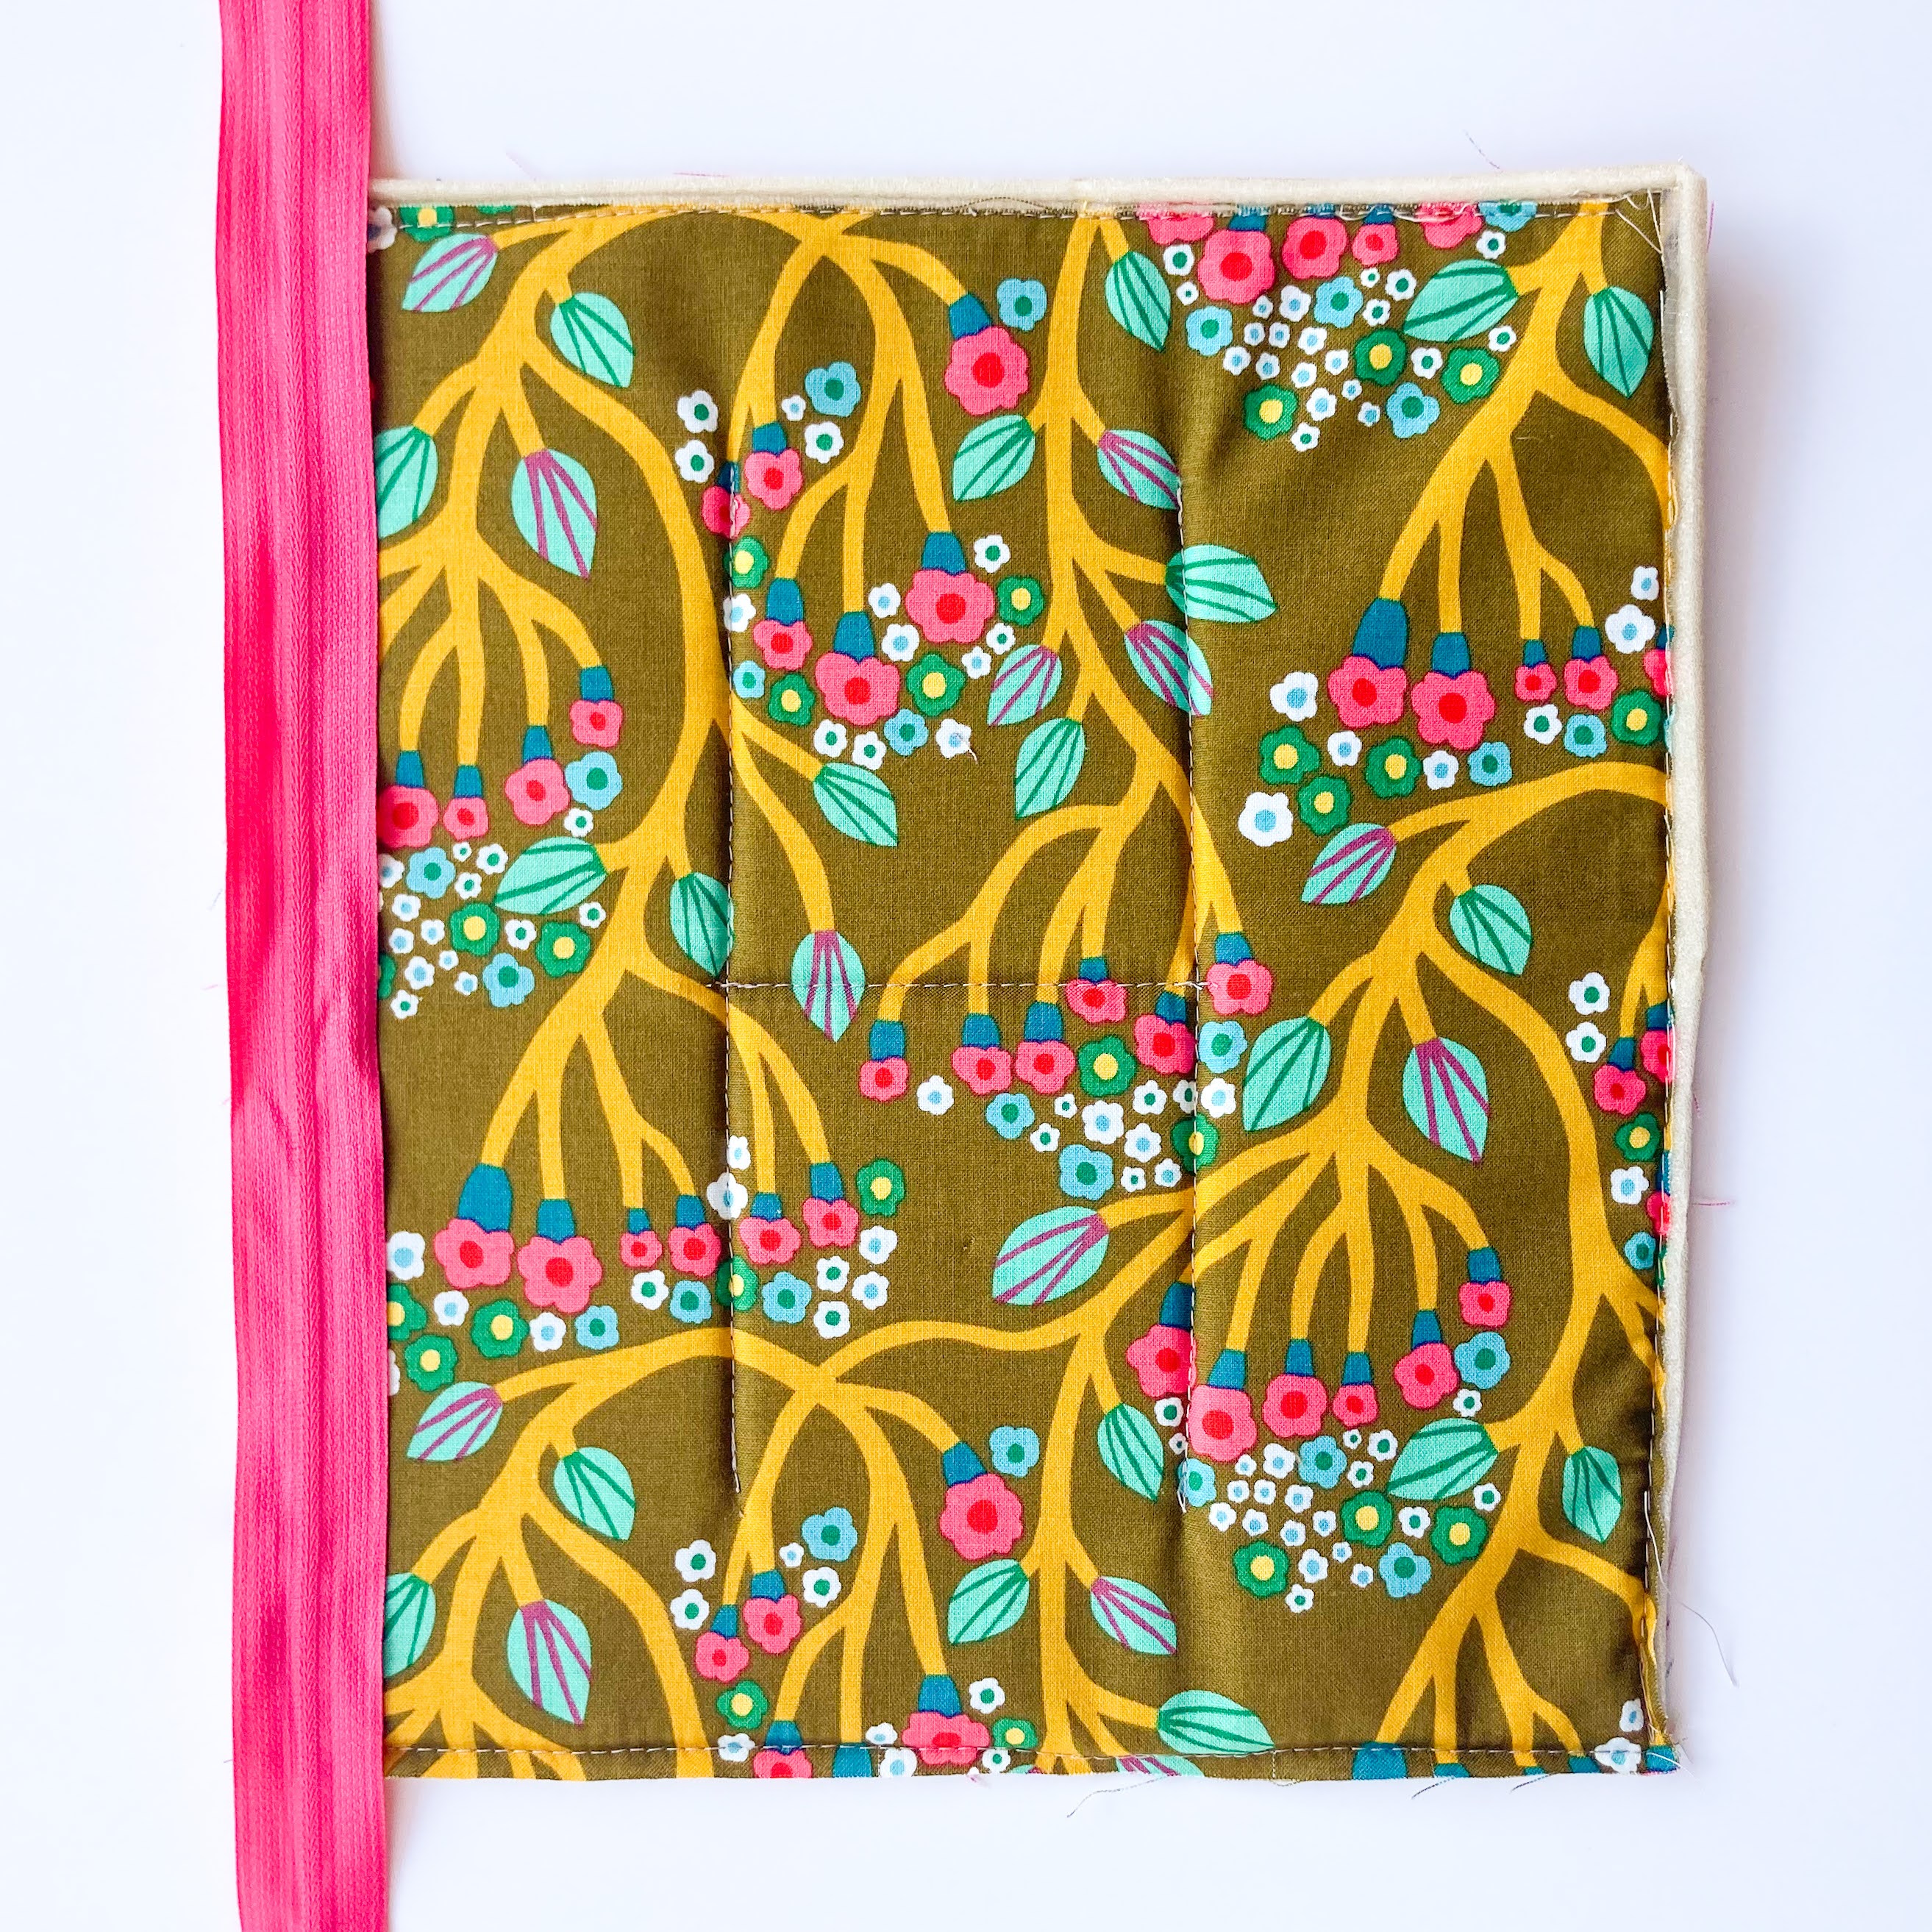 Blue Susan Makes: Grow Zipper Pouch Tutorial with Boxed Corners